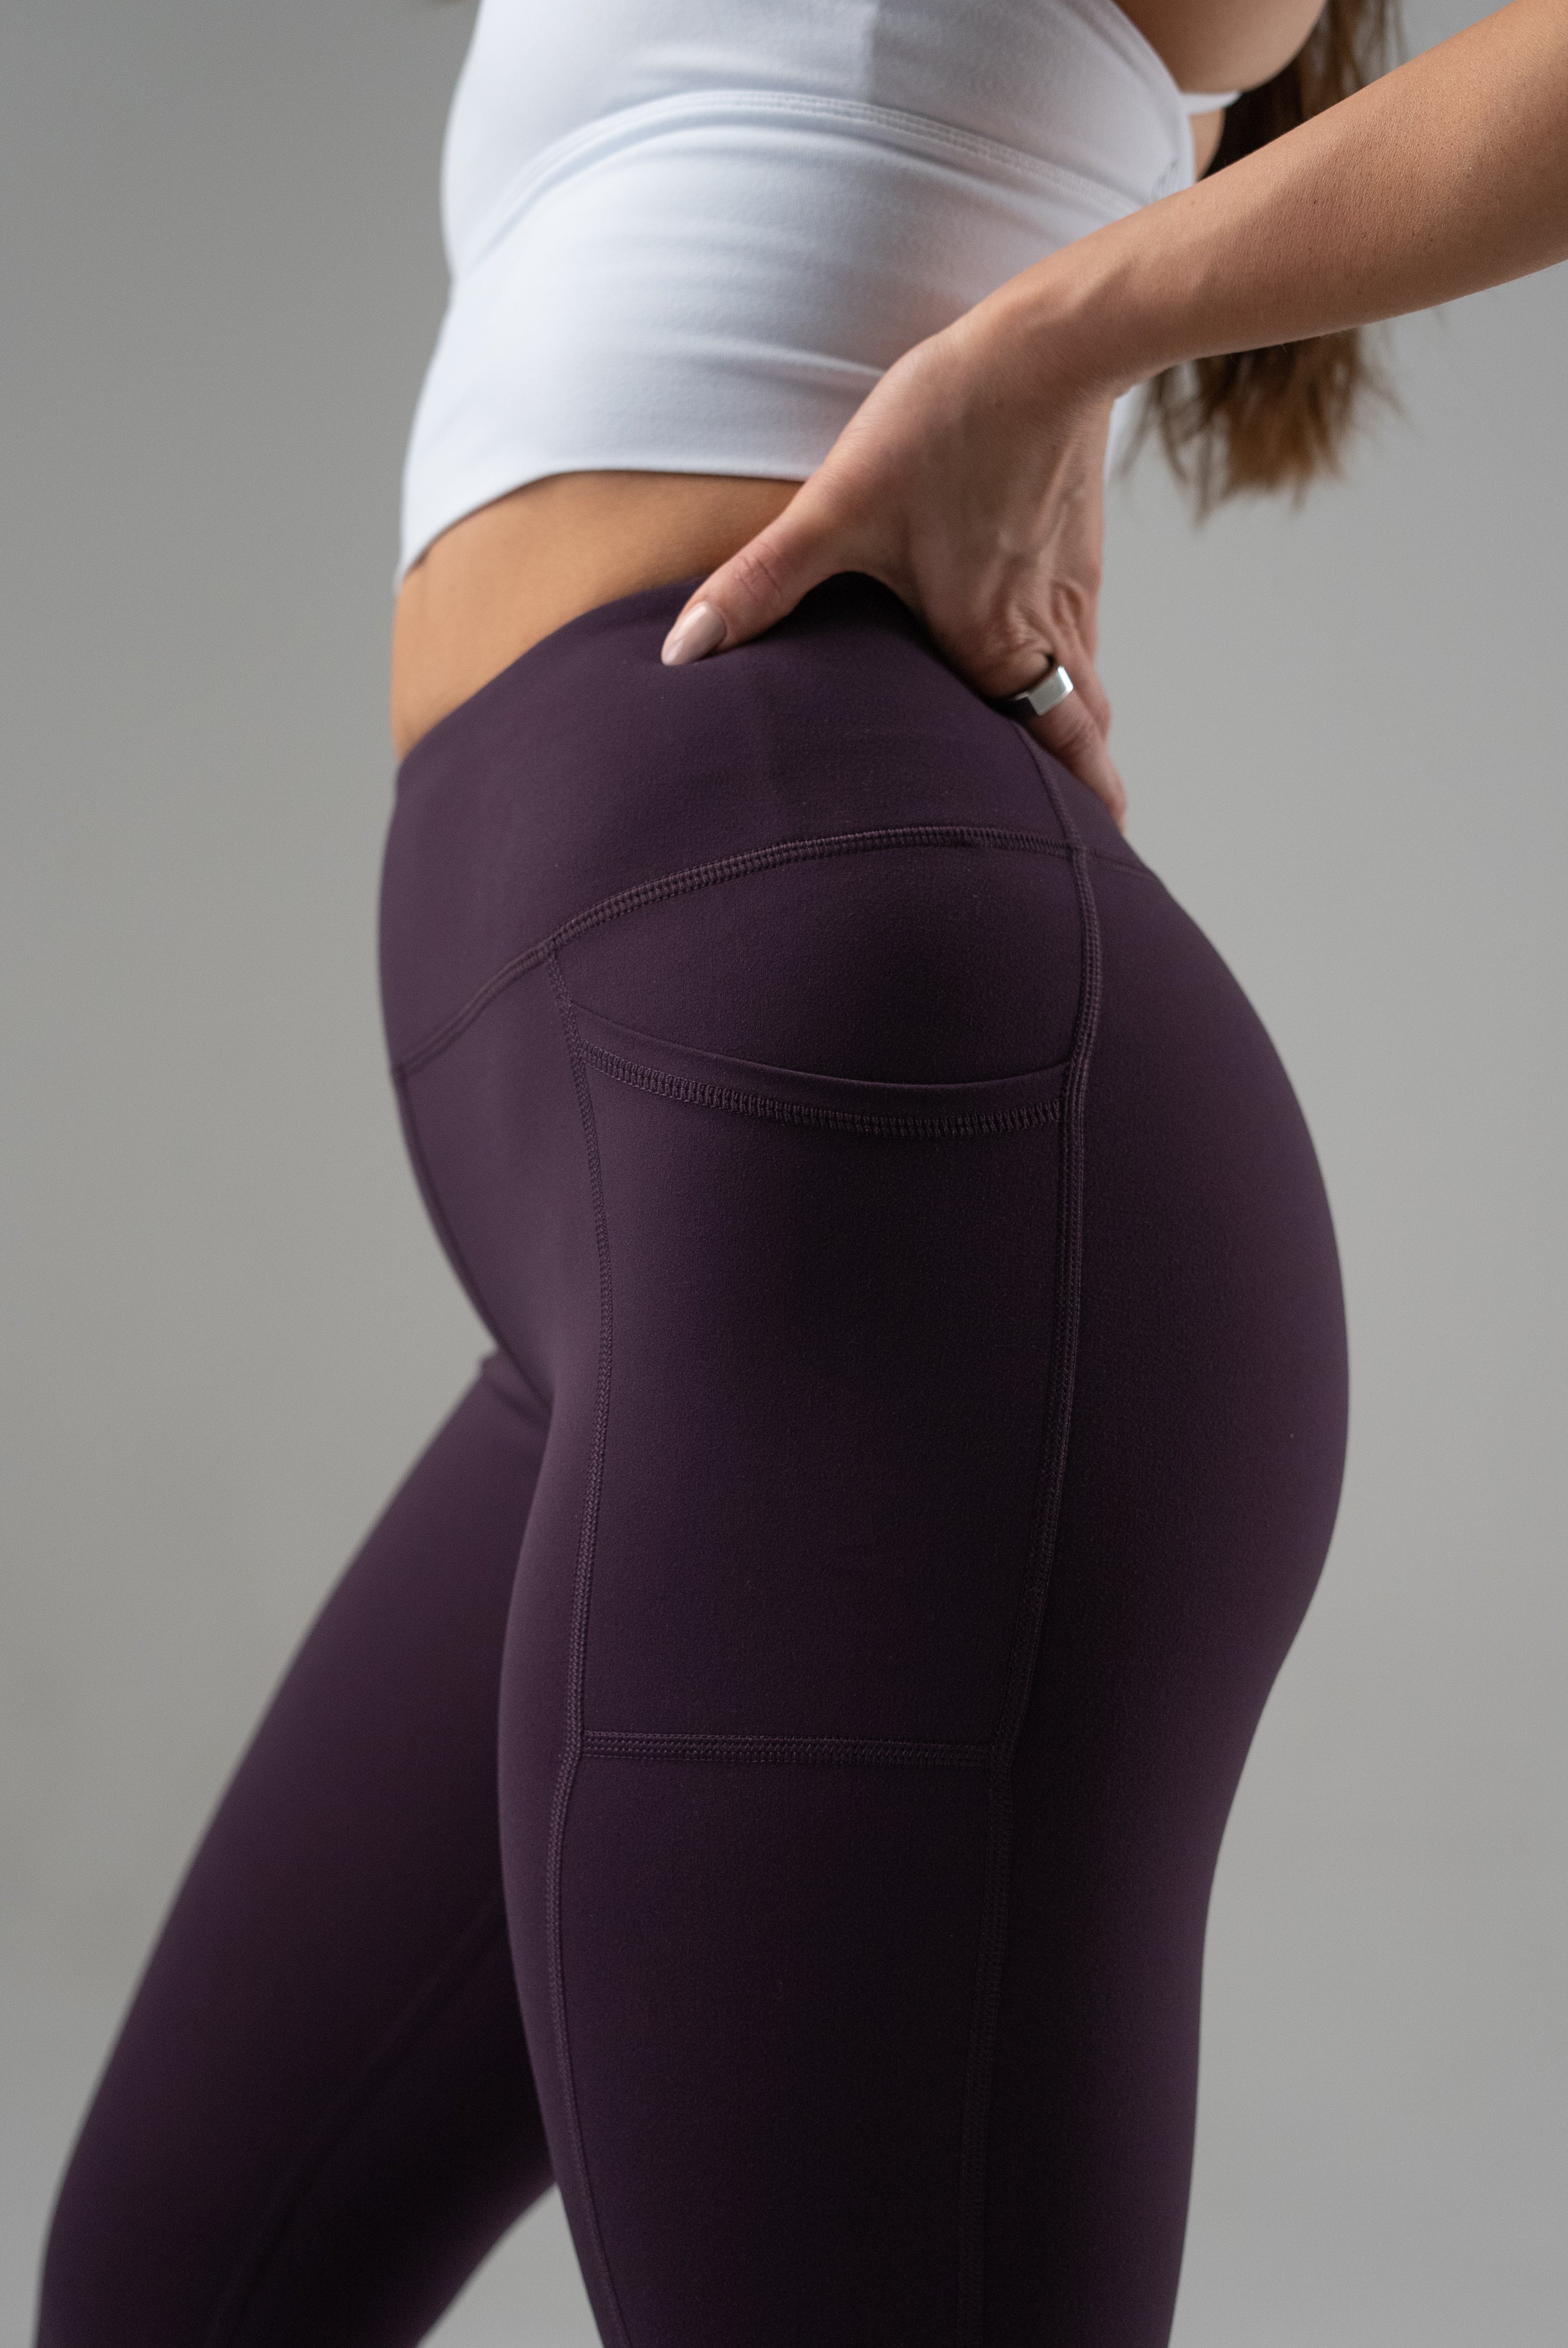 The Best lululemon Leggings (Workout to Everyday Wear!) - Nourish, Move,  Love